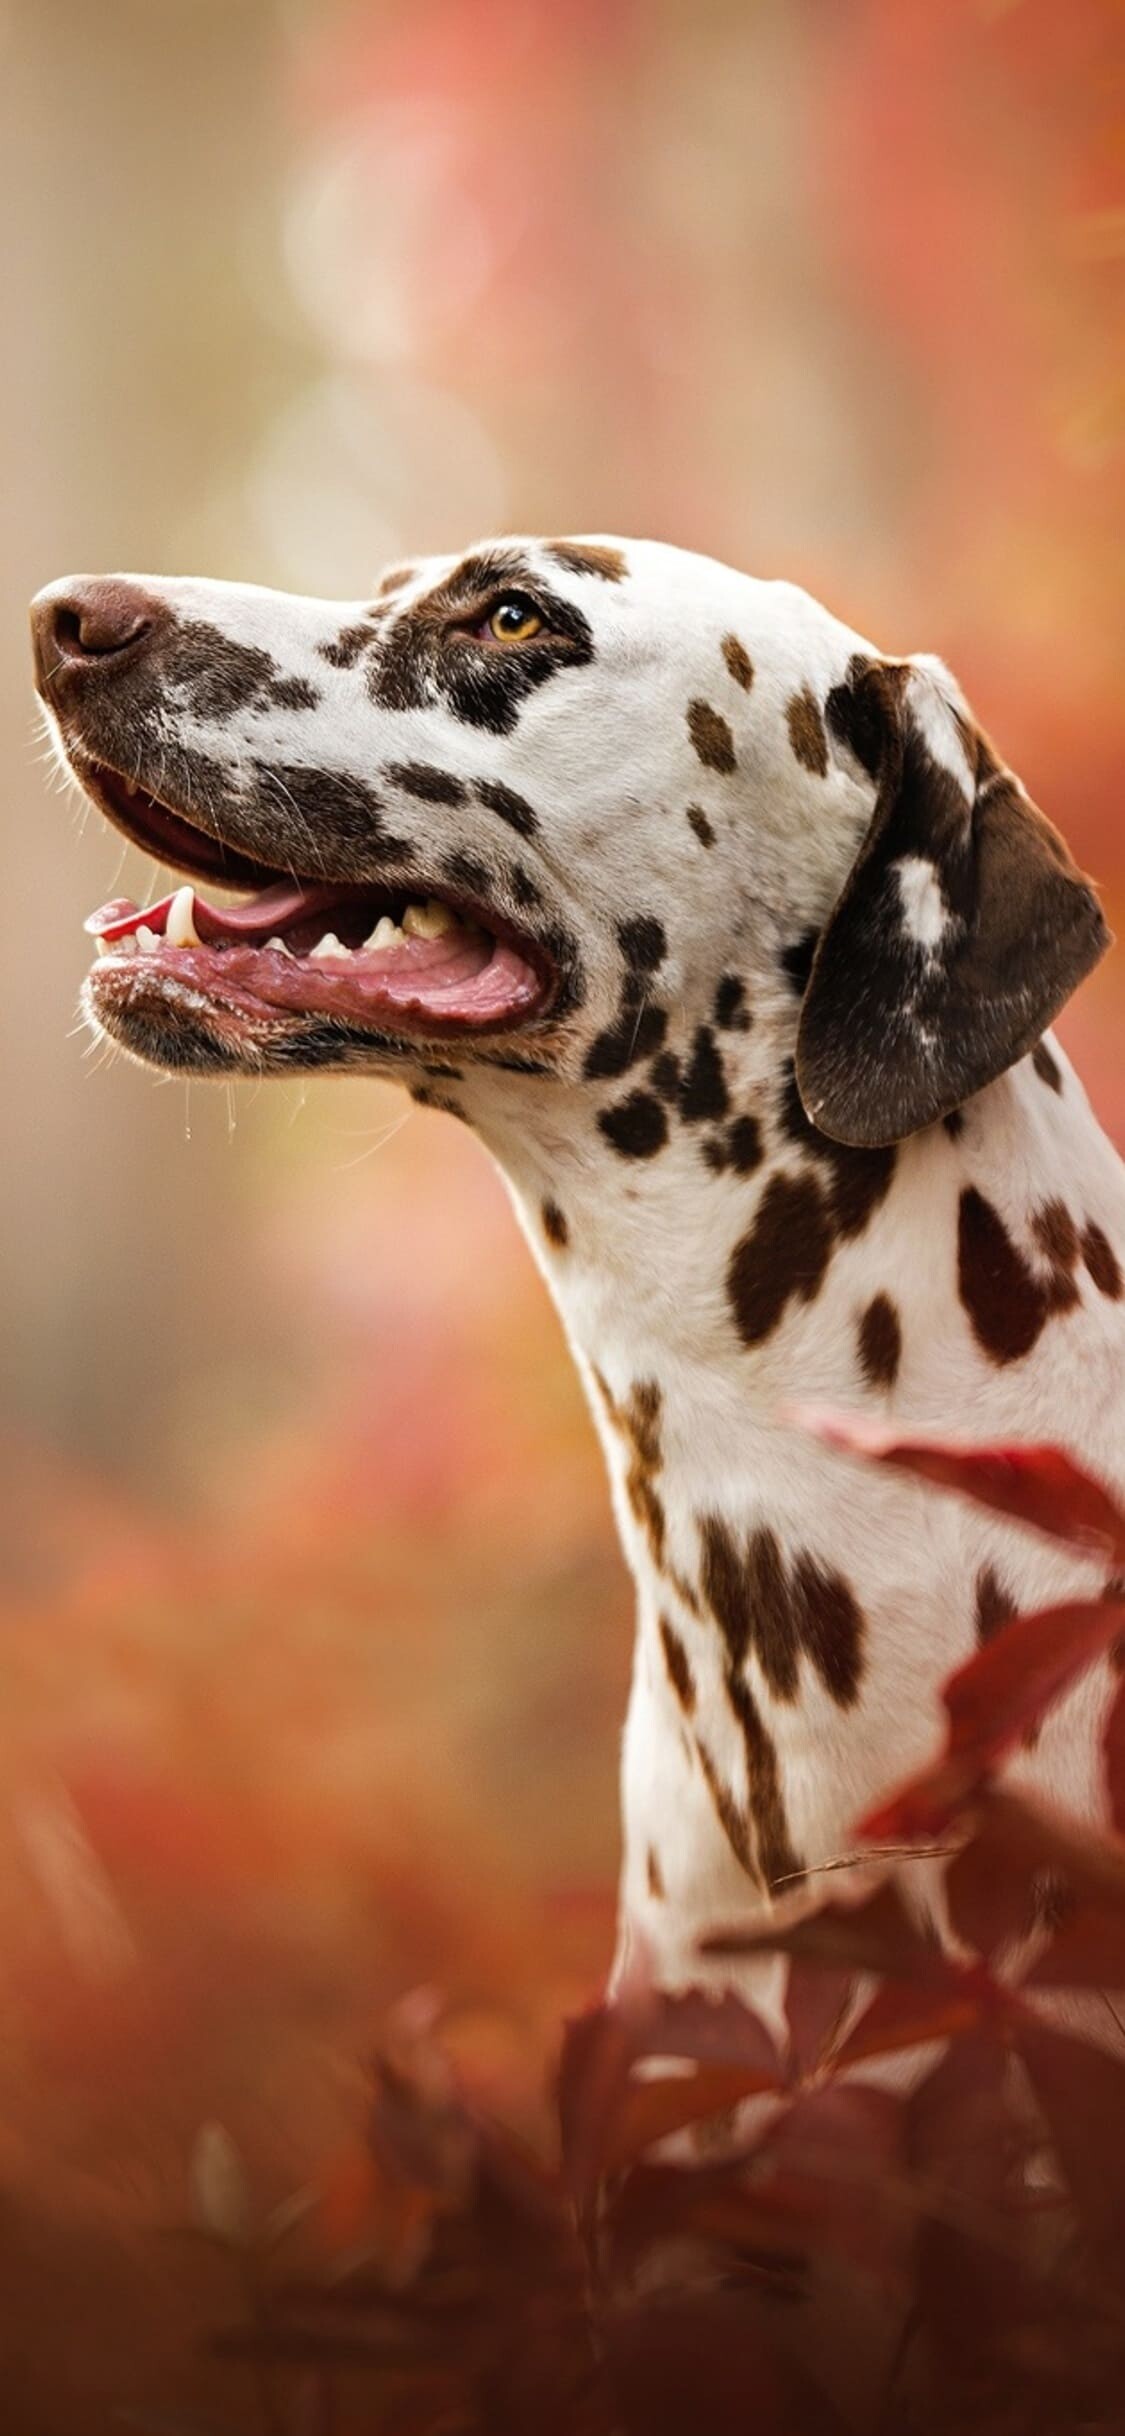 Dog: The Dalmatian, Has a white coat marked with black or brown-colored spots. 1130x2440 HD Wallpaper.